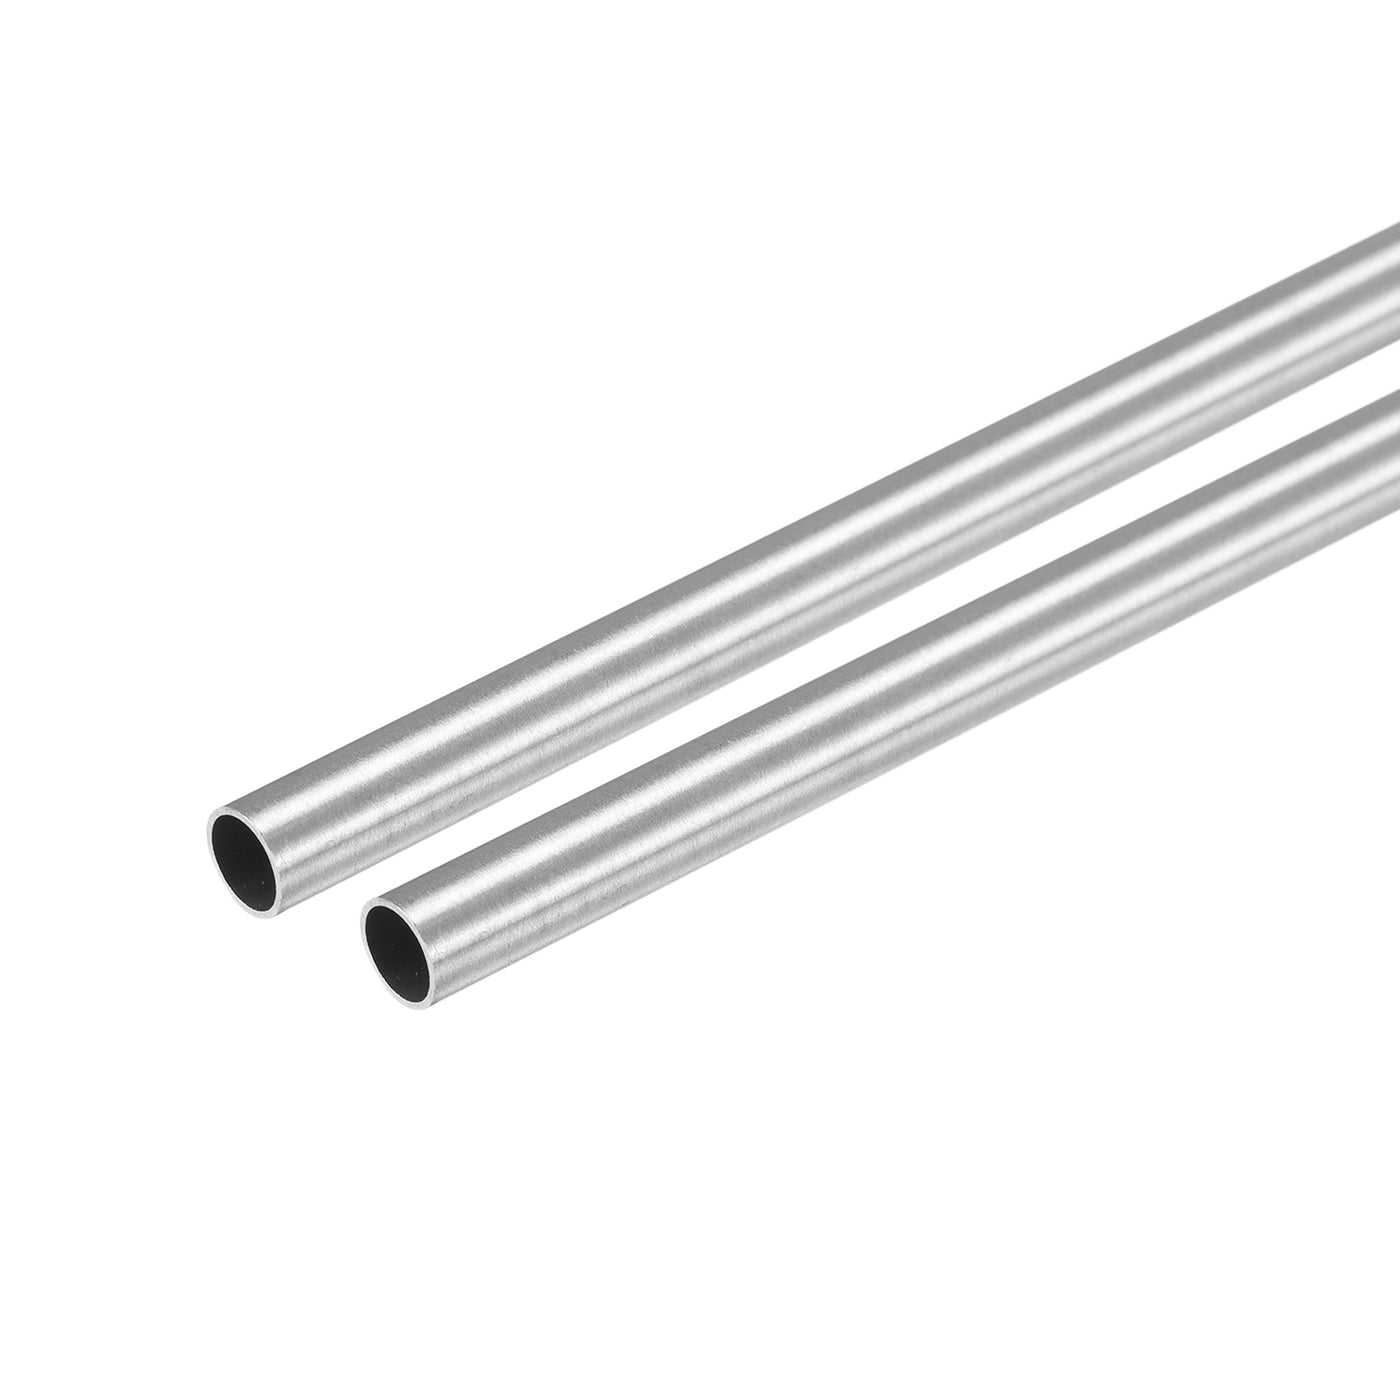 Uxcell Uxcell 304 Stainless Steel Round Tube 6mm OD 0.4mm Wall Thickness 300mm Length 2 Pcs